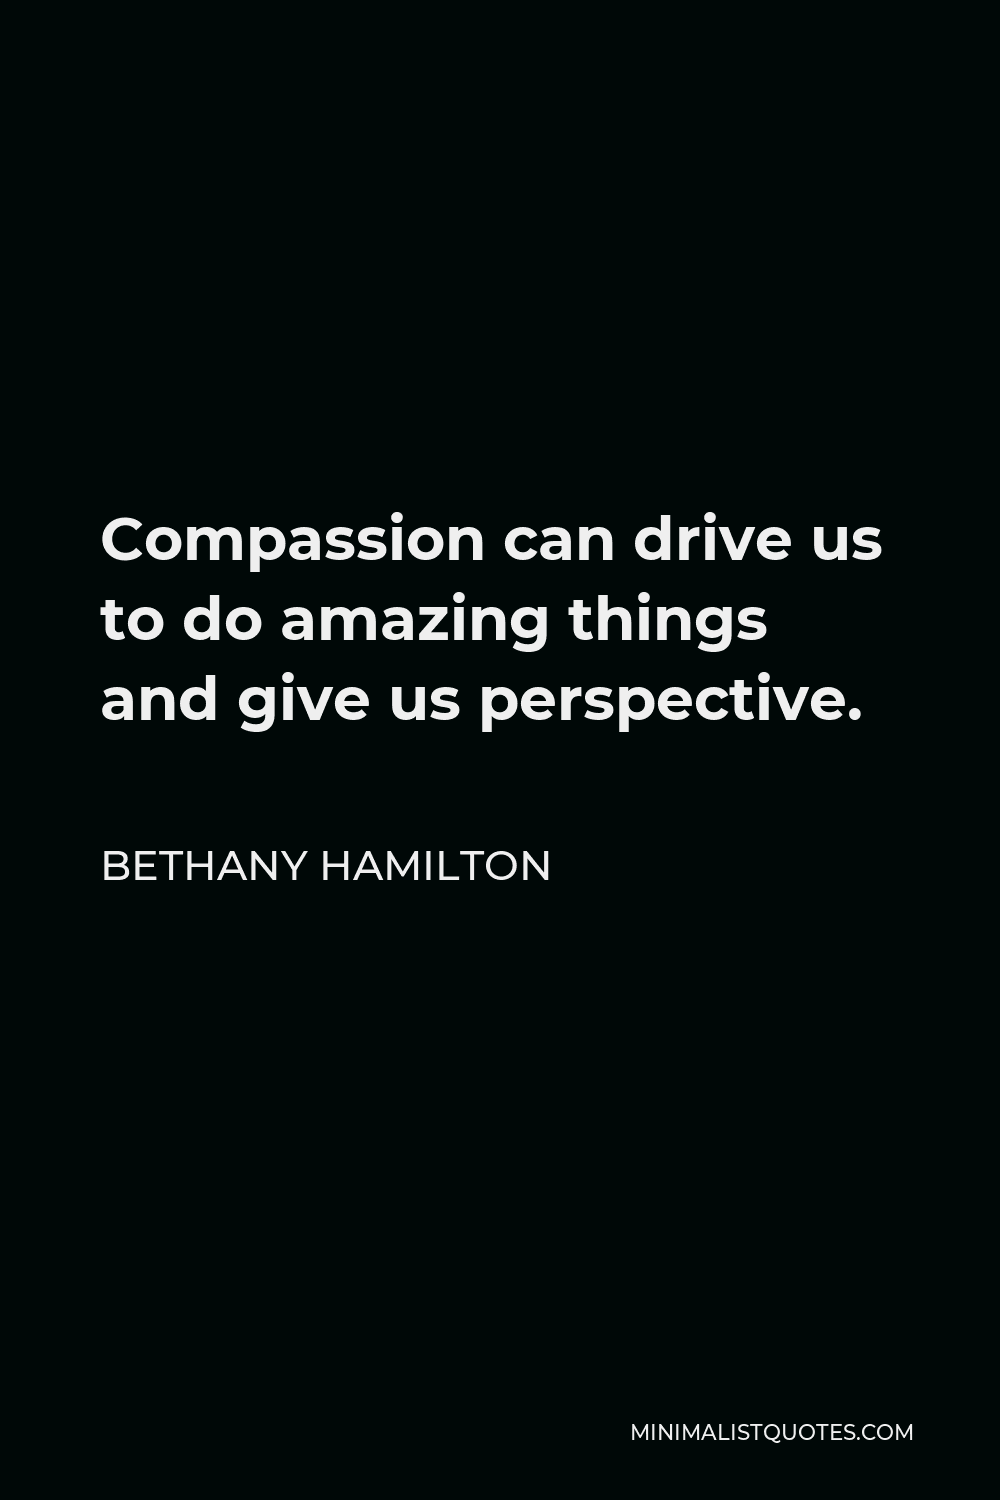 Bethany Hamilton Quote - Compassion can drive us to do amazing things and give us perspective.